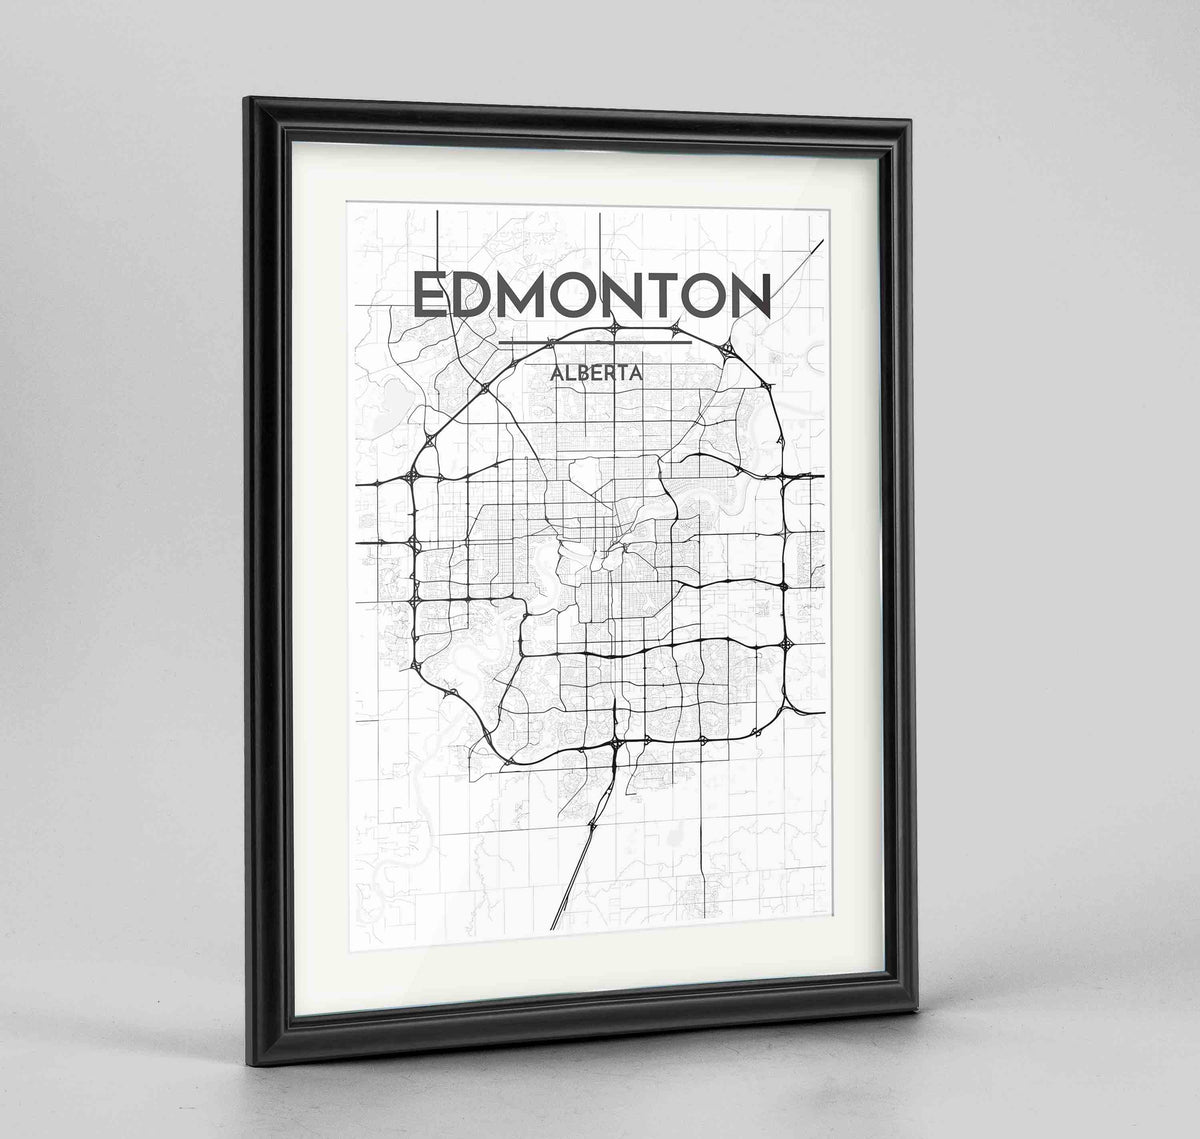 Framed Edmonton City Map 24x36&quot; Traditional Black frame Point Two Design Group